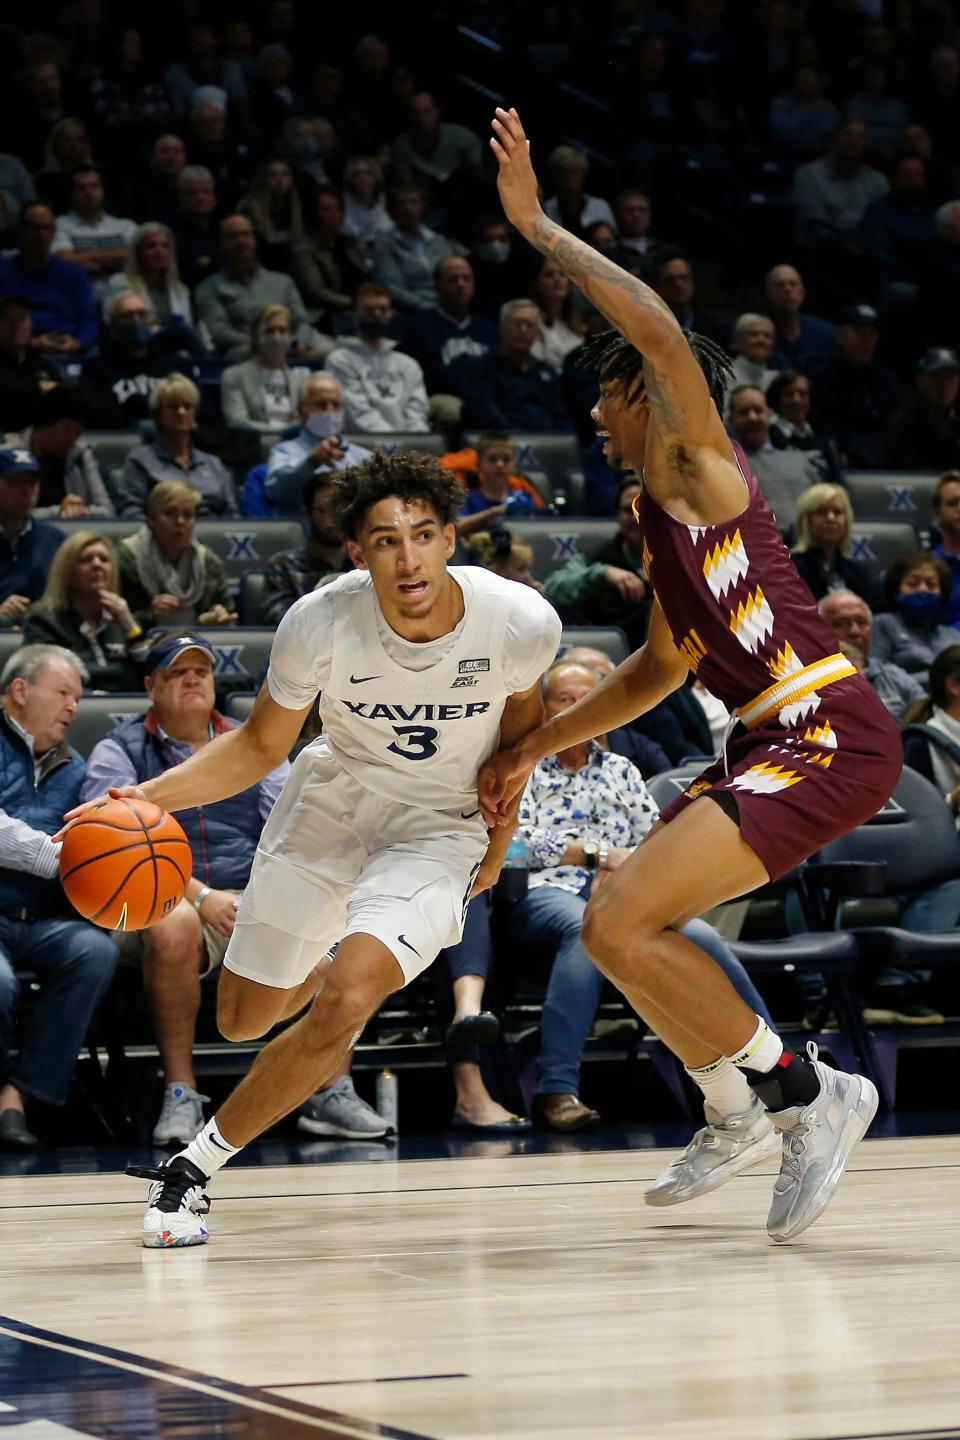 Xavier Musketeers guard Colby Jones (3) drives along the baseline in the first half of the NCAA basketball game between the Xavier Musketeers and the Central Michigan Chippewas at the Cintas Center in Cincinnati on Wednesday, Dec. 1, 2021. Xavier led 41-25 at halftime. 